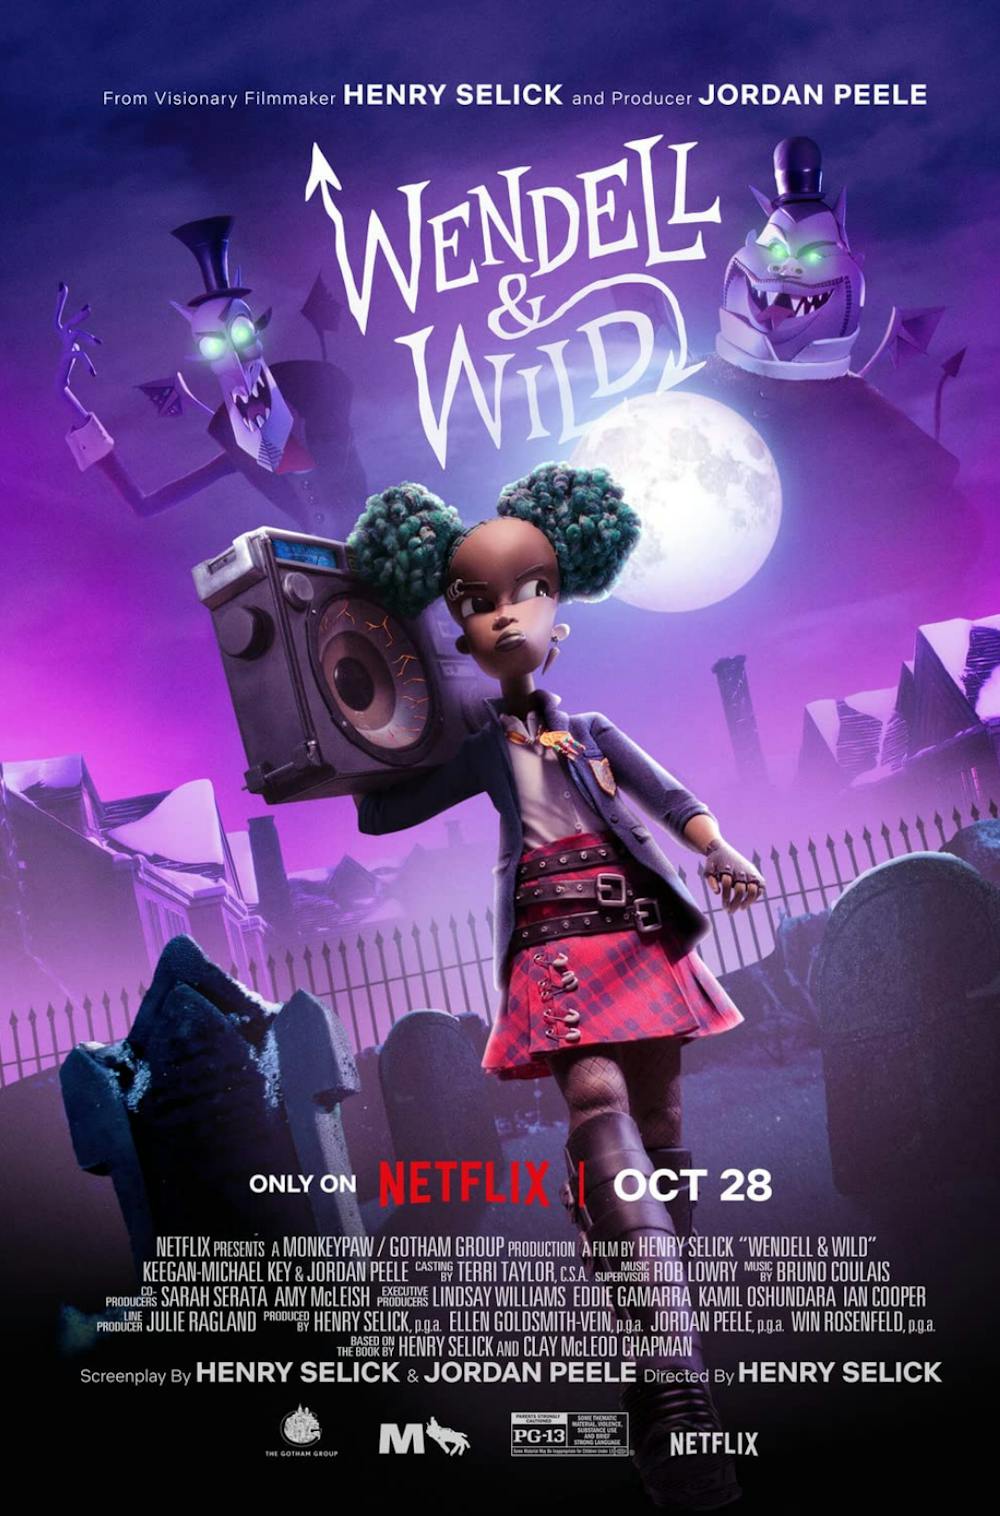 Coraline” vs. “Wendell and Wild”: The battle of the horrors – The